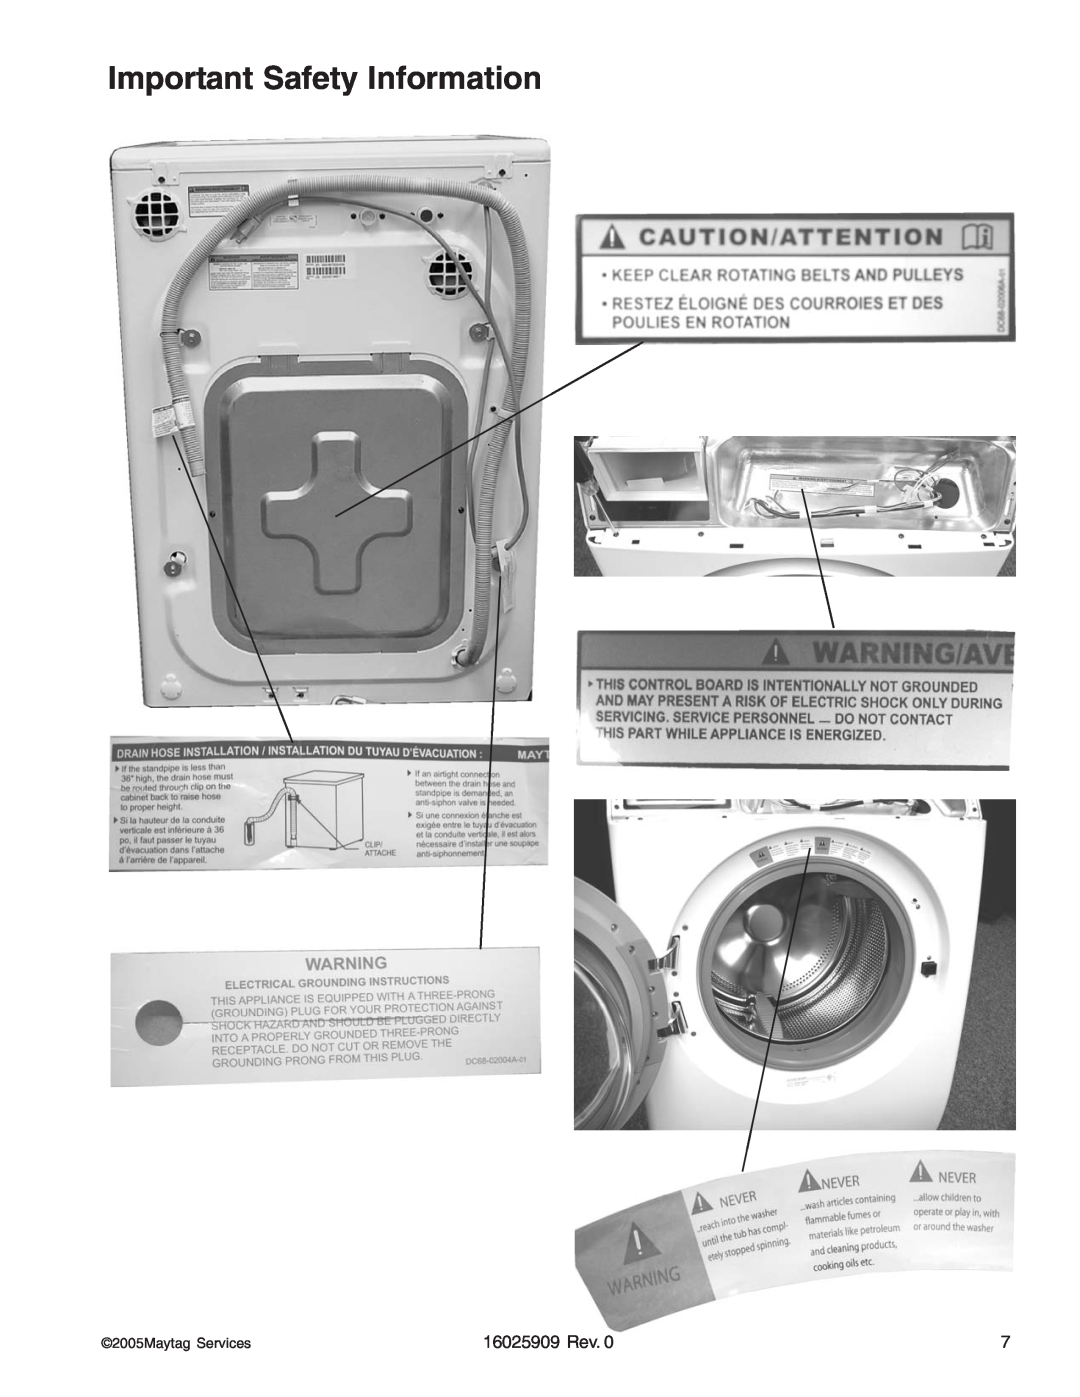 Whirlpool MAH9700AW manual Important Safety Information, 16025909 Rev 